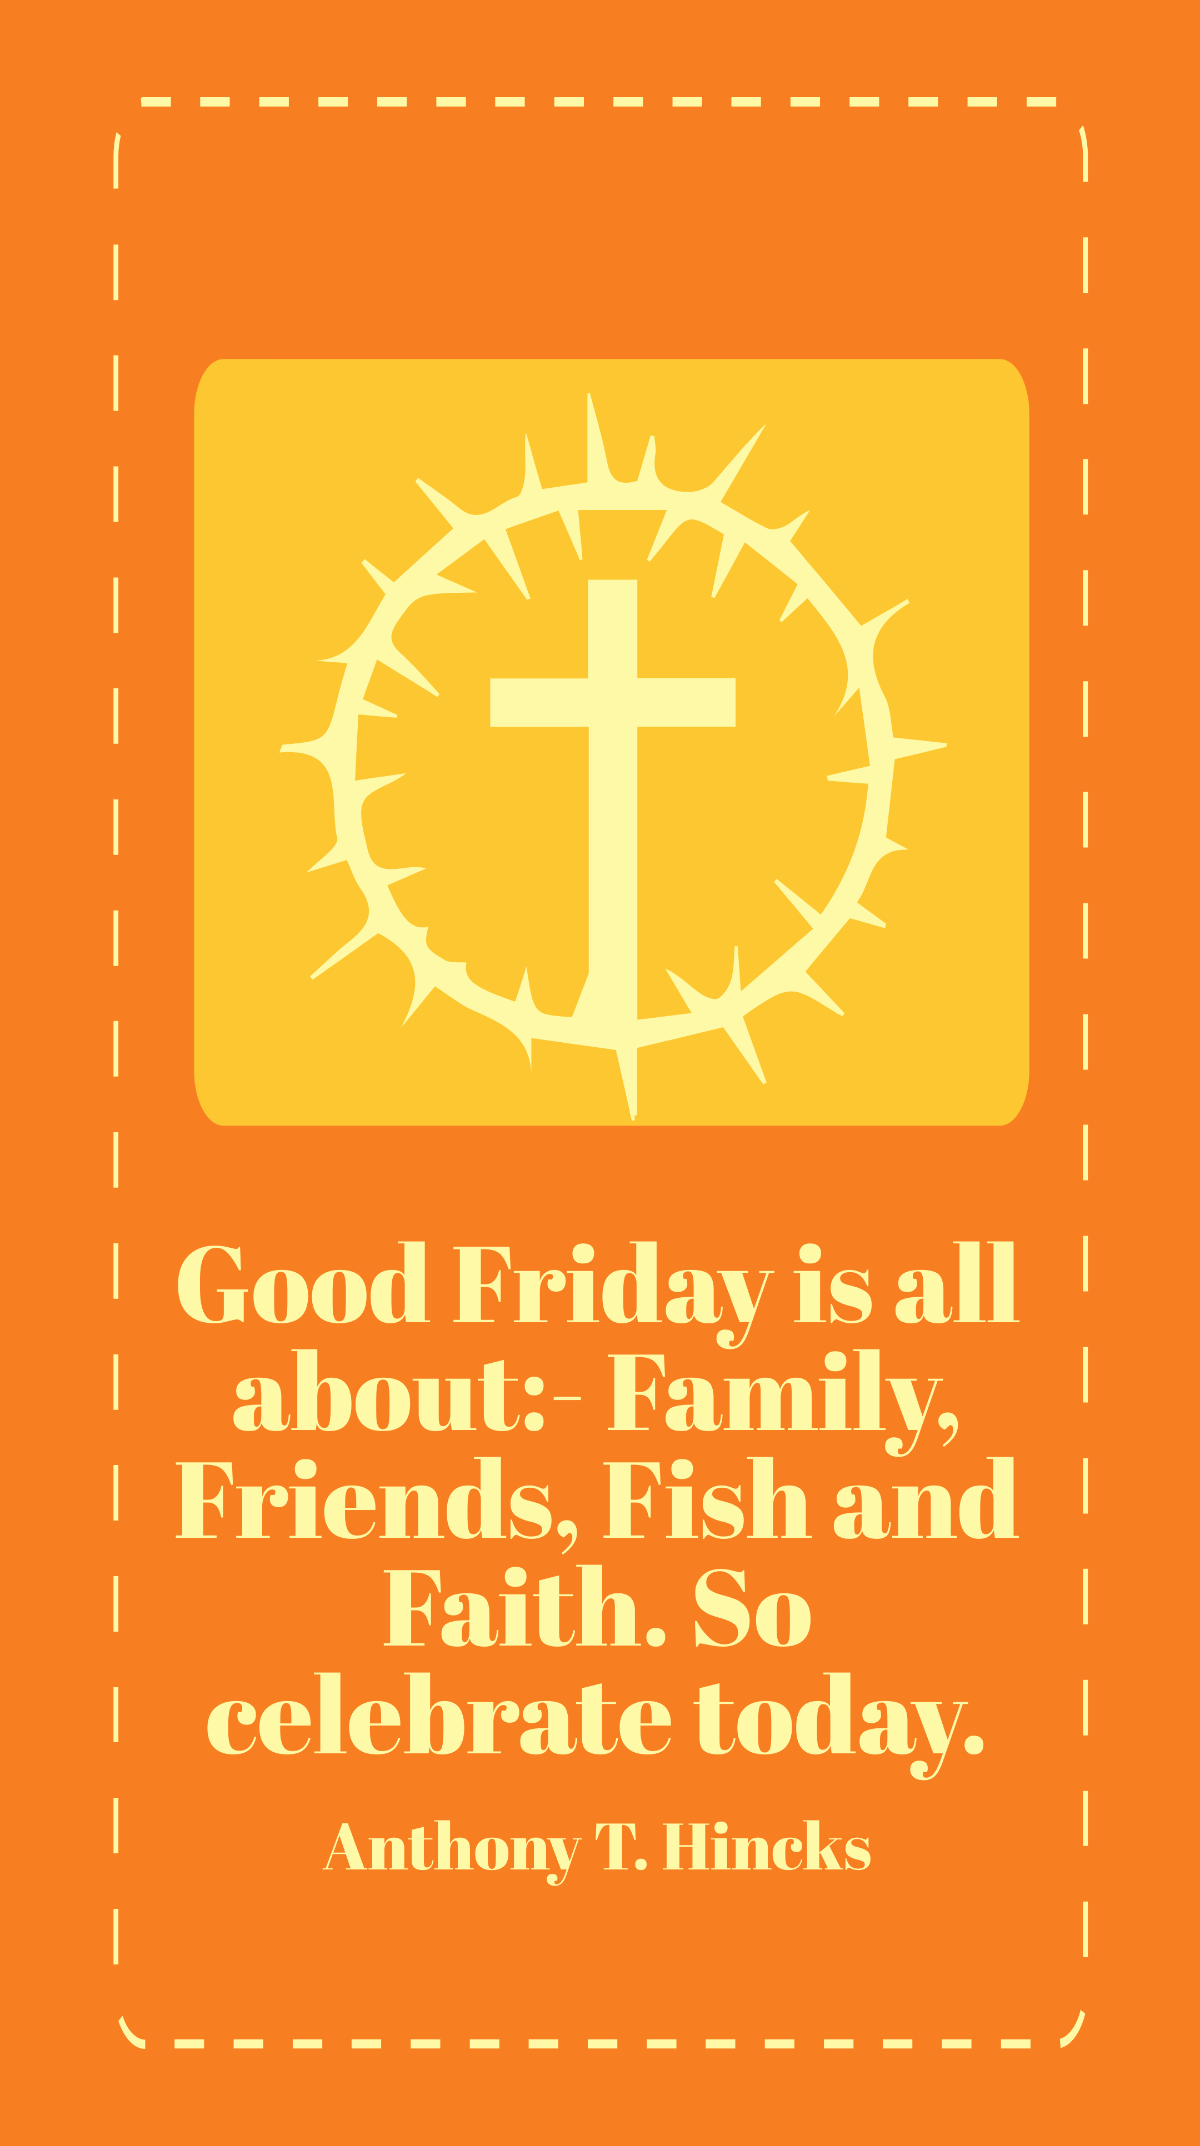 Anthony T. Hincks - Good Friday is all about:- Family, Friends, Fish and Faith. So celebrate today. Template